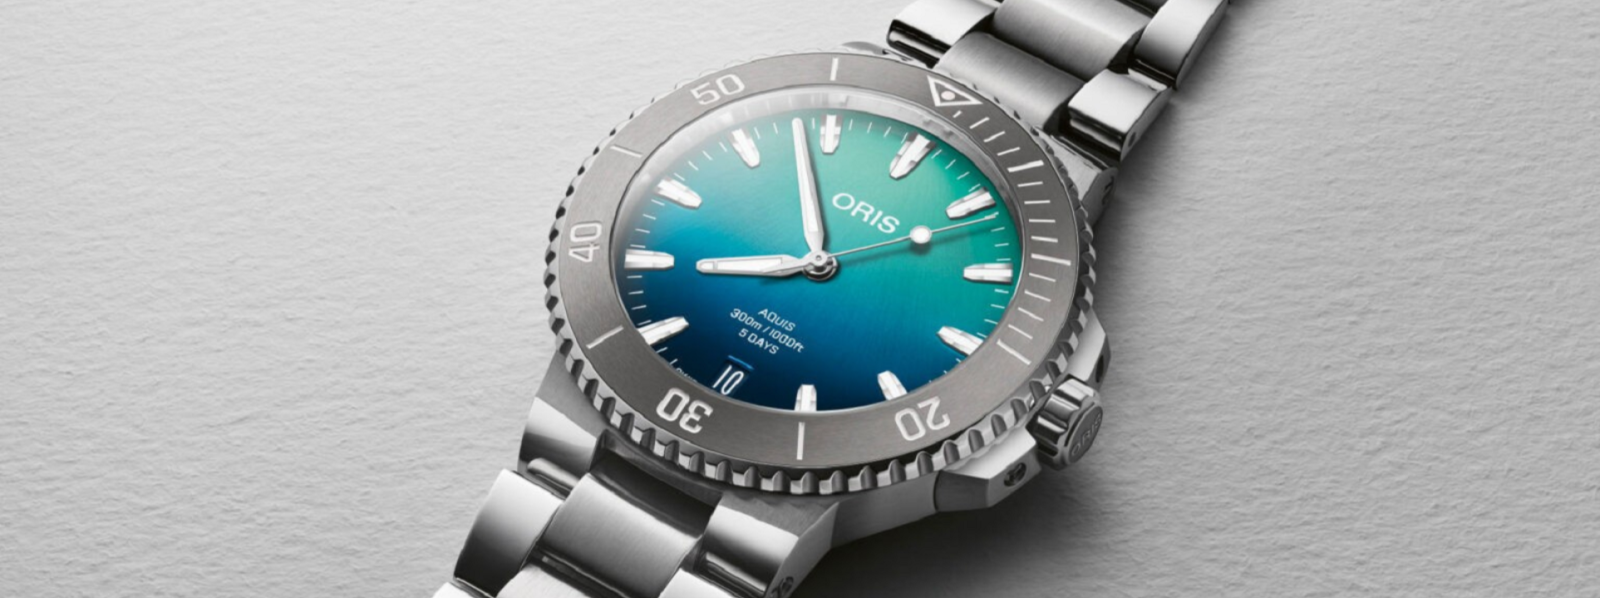 Oris Great Barrier Reef Limited Edition IV